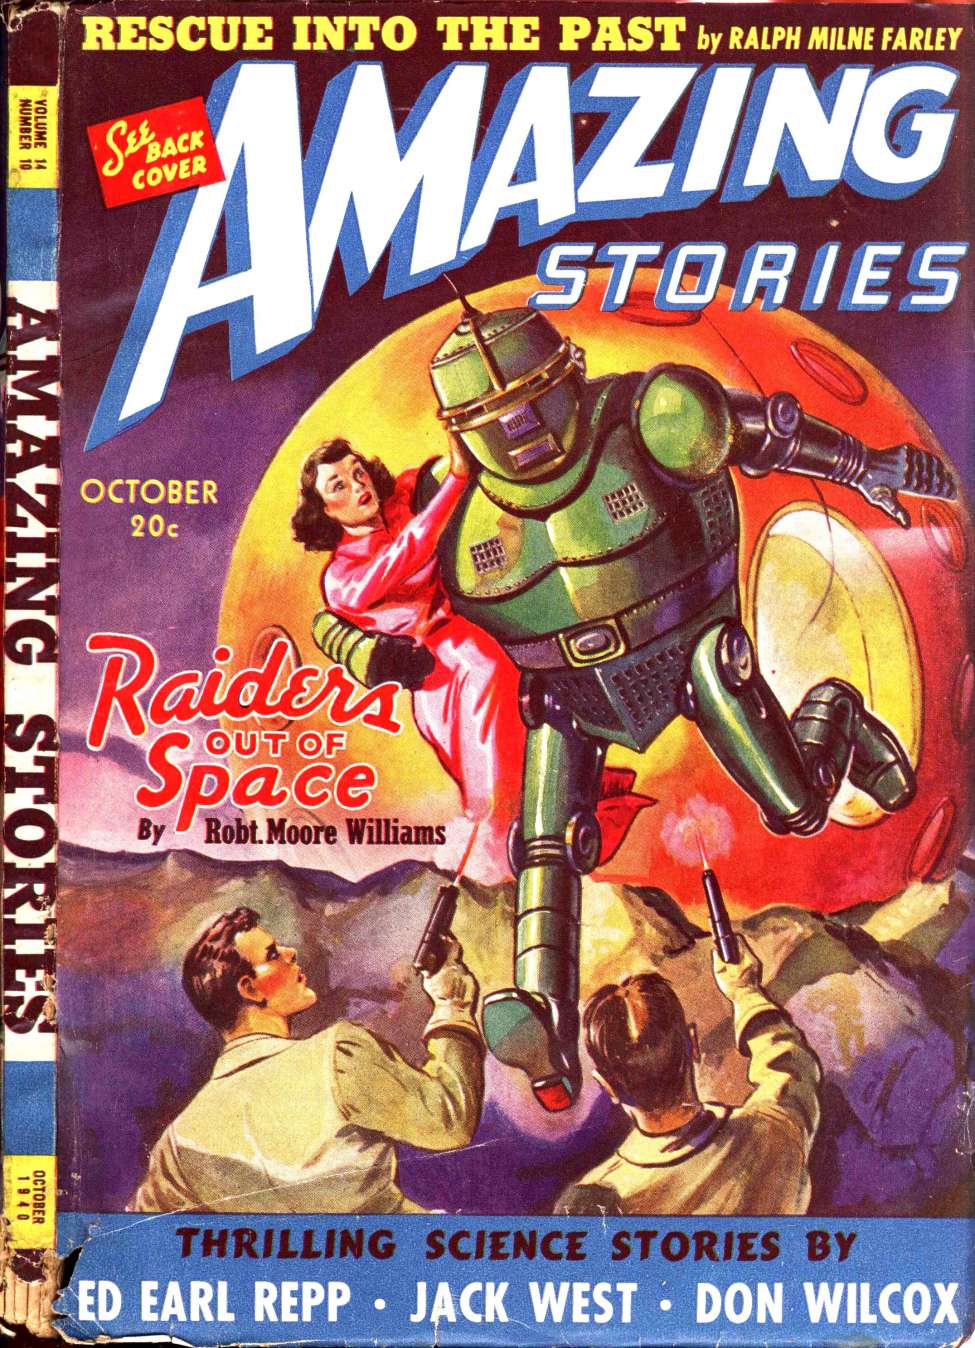 Comic Book Cover For Amazing Stories v14 10 - Raiders Out of Space - Robert Moore Williams